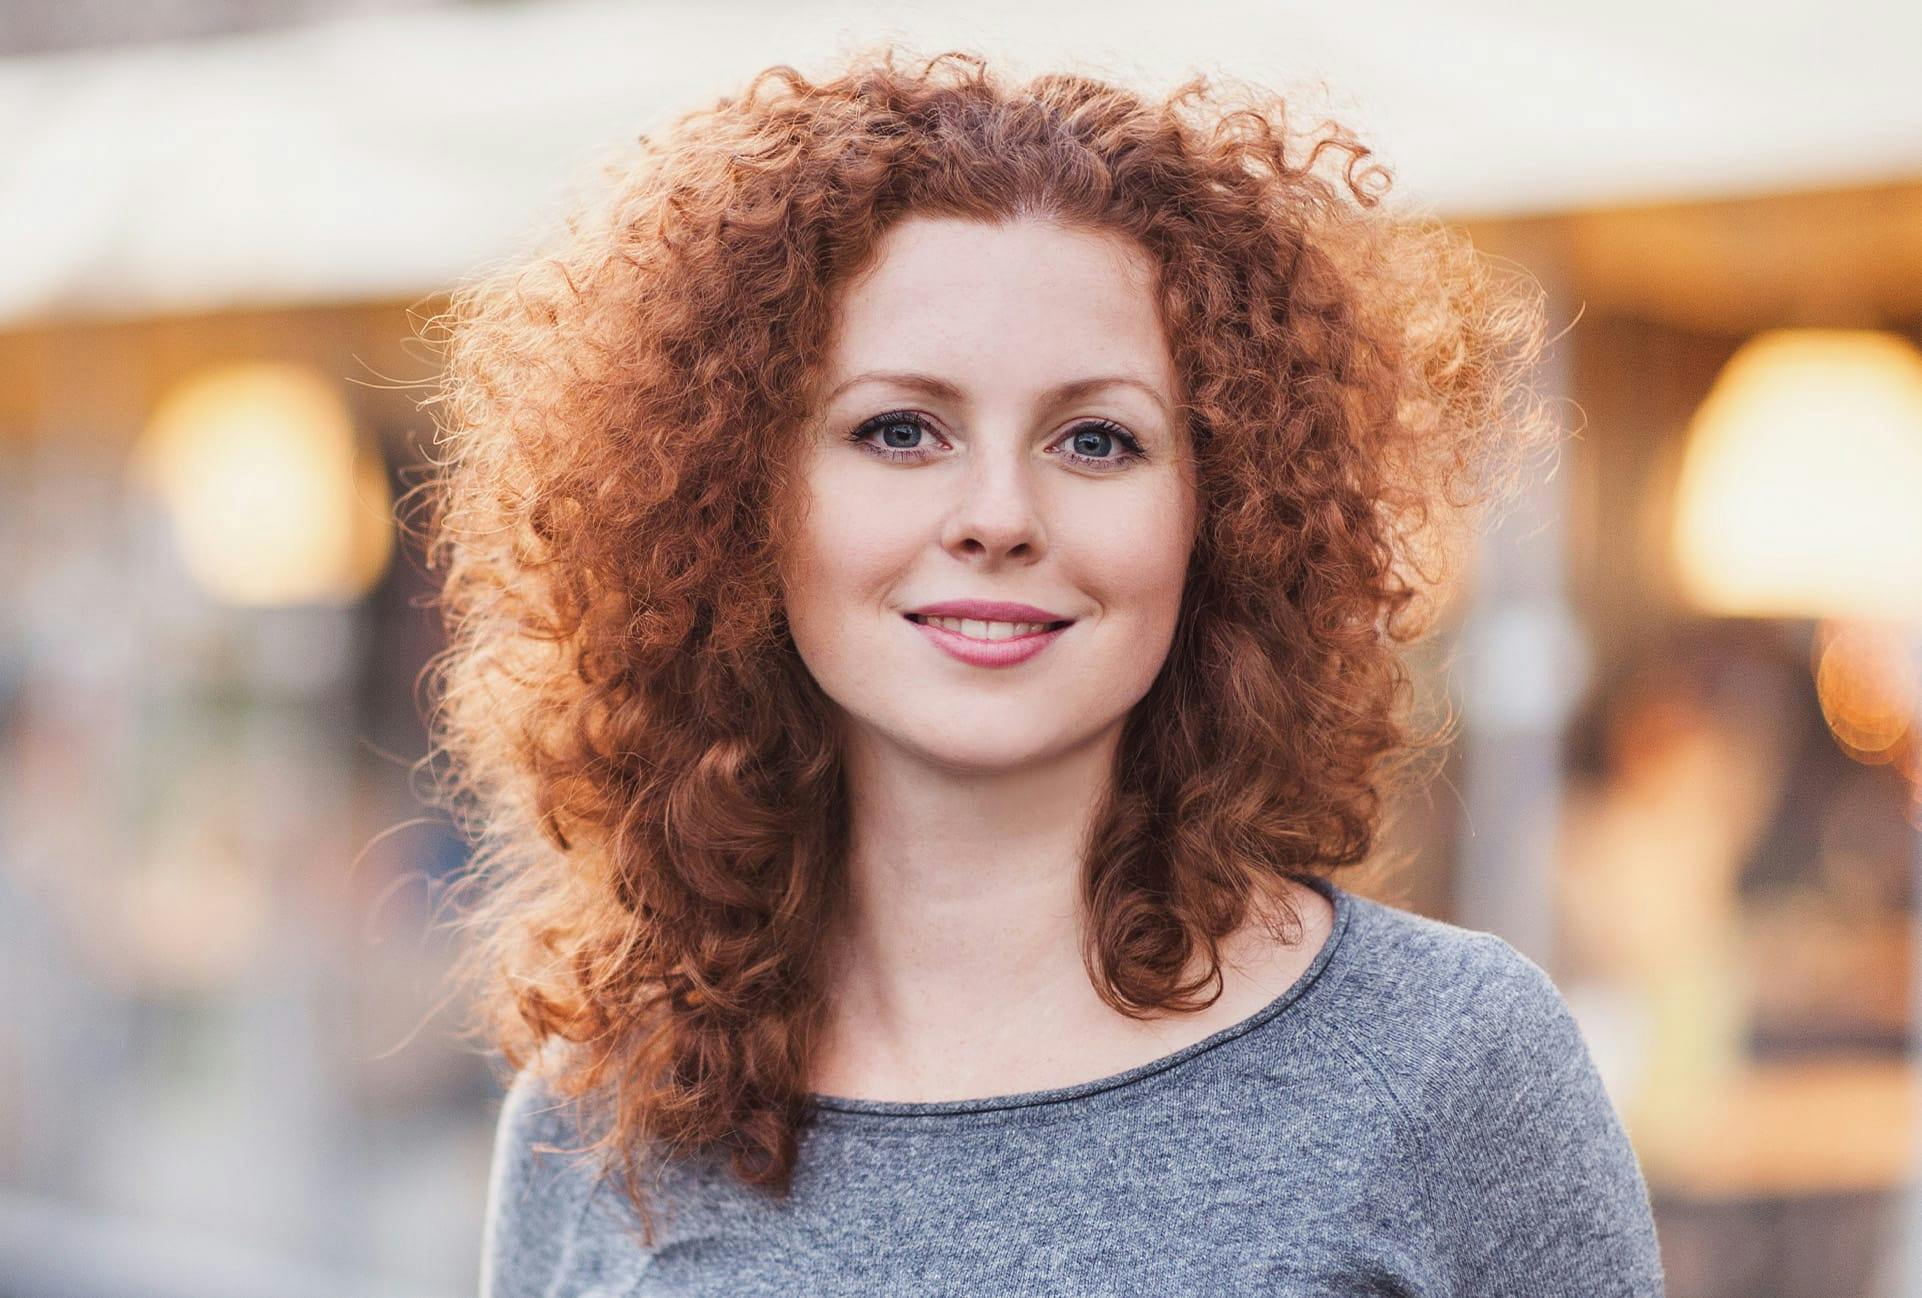 woman with curly hair wearing grey shirt smiling